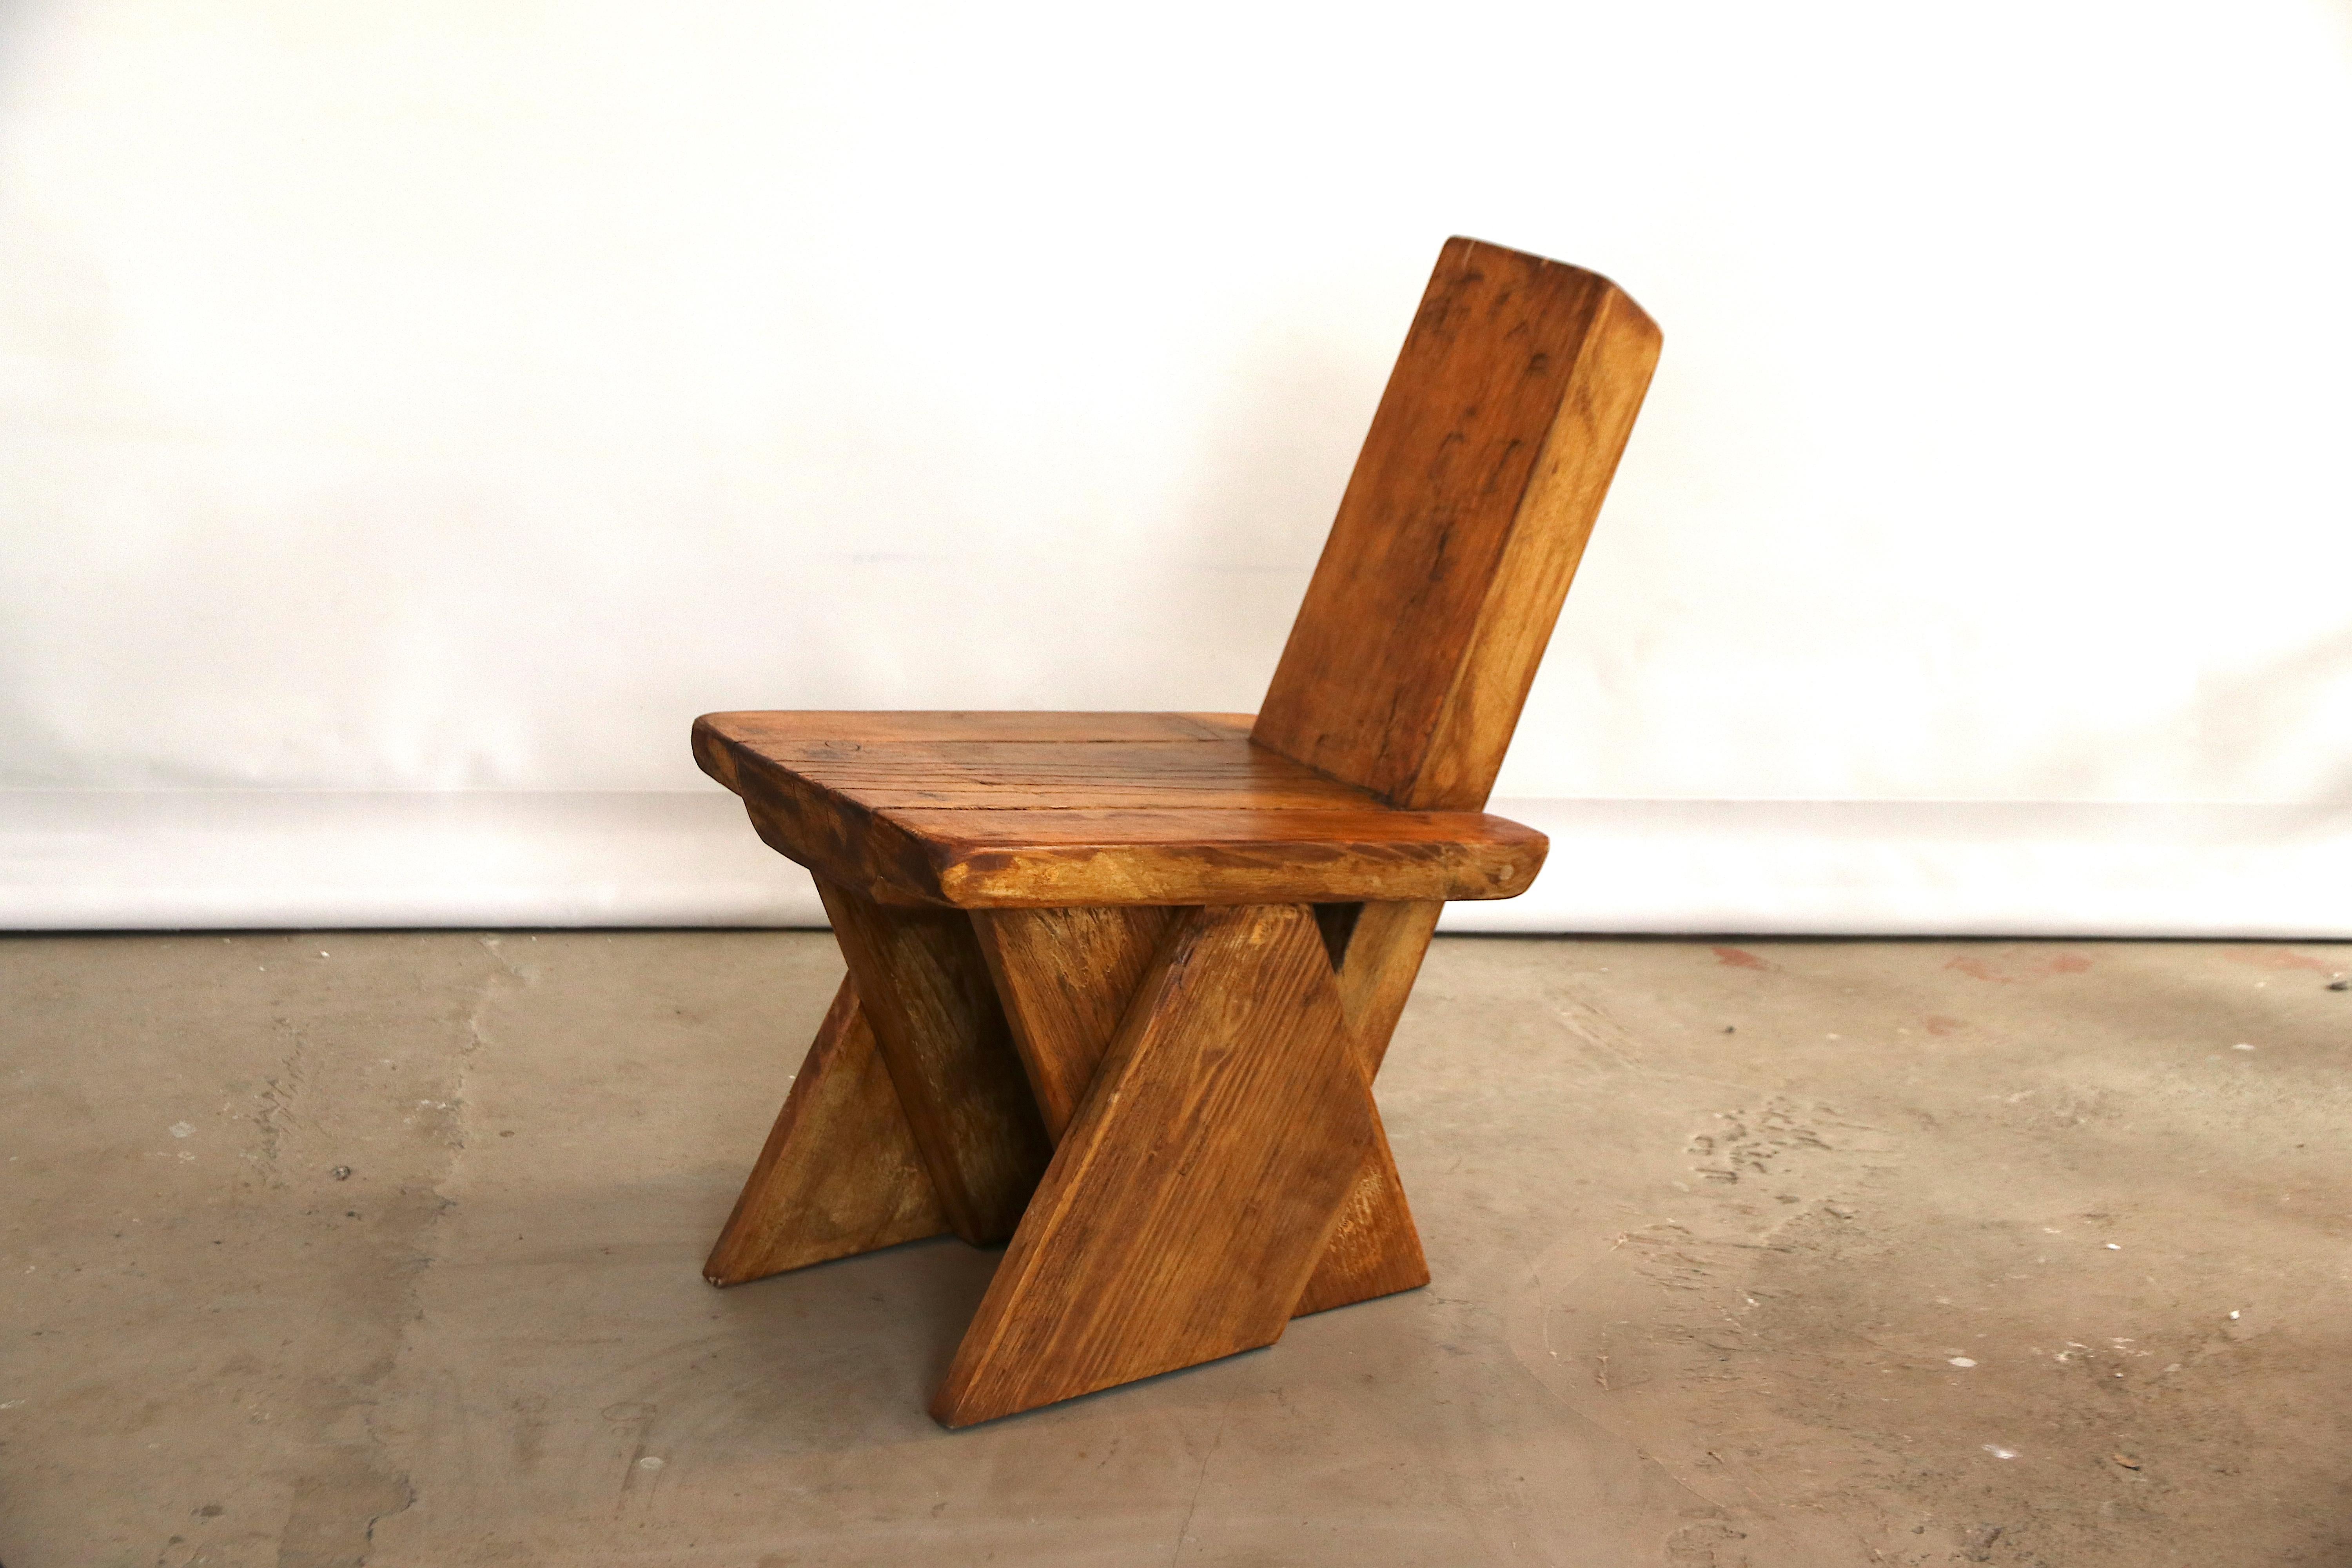 Beautifully shaped little chair or decorative stool or ottoman made of French oakwood. Wonderfully crafted with a beautiful patina in a Brutalist style, without the use of any nails. Highly decorative and a true eye catcher in any interior. Can be